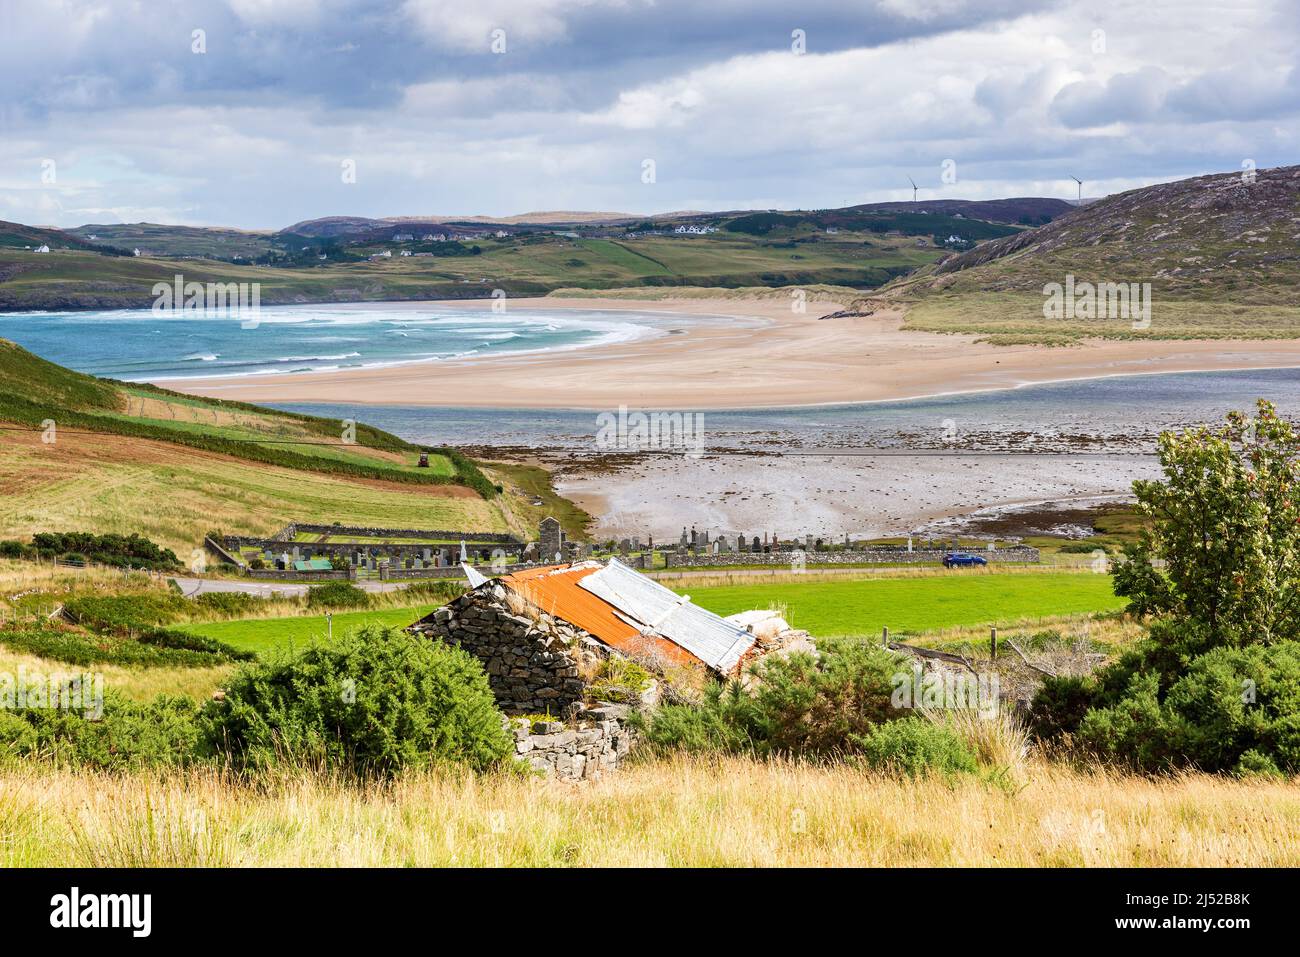 An old stone building with a tin roof overlooks the large, deserted, sandy beach and brilliant turquoise sea at Torrisdale Bay, on a sunny day. Stock Photo